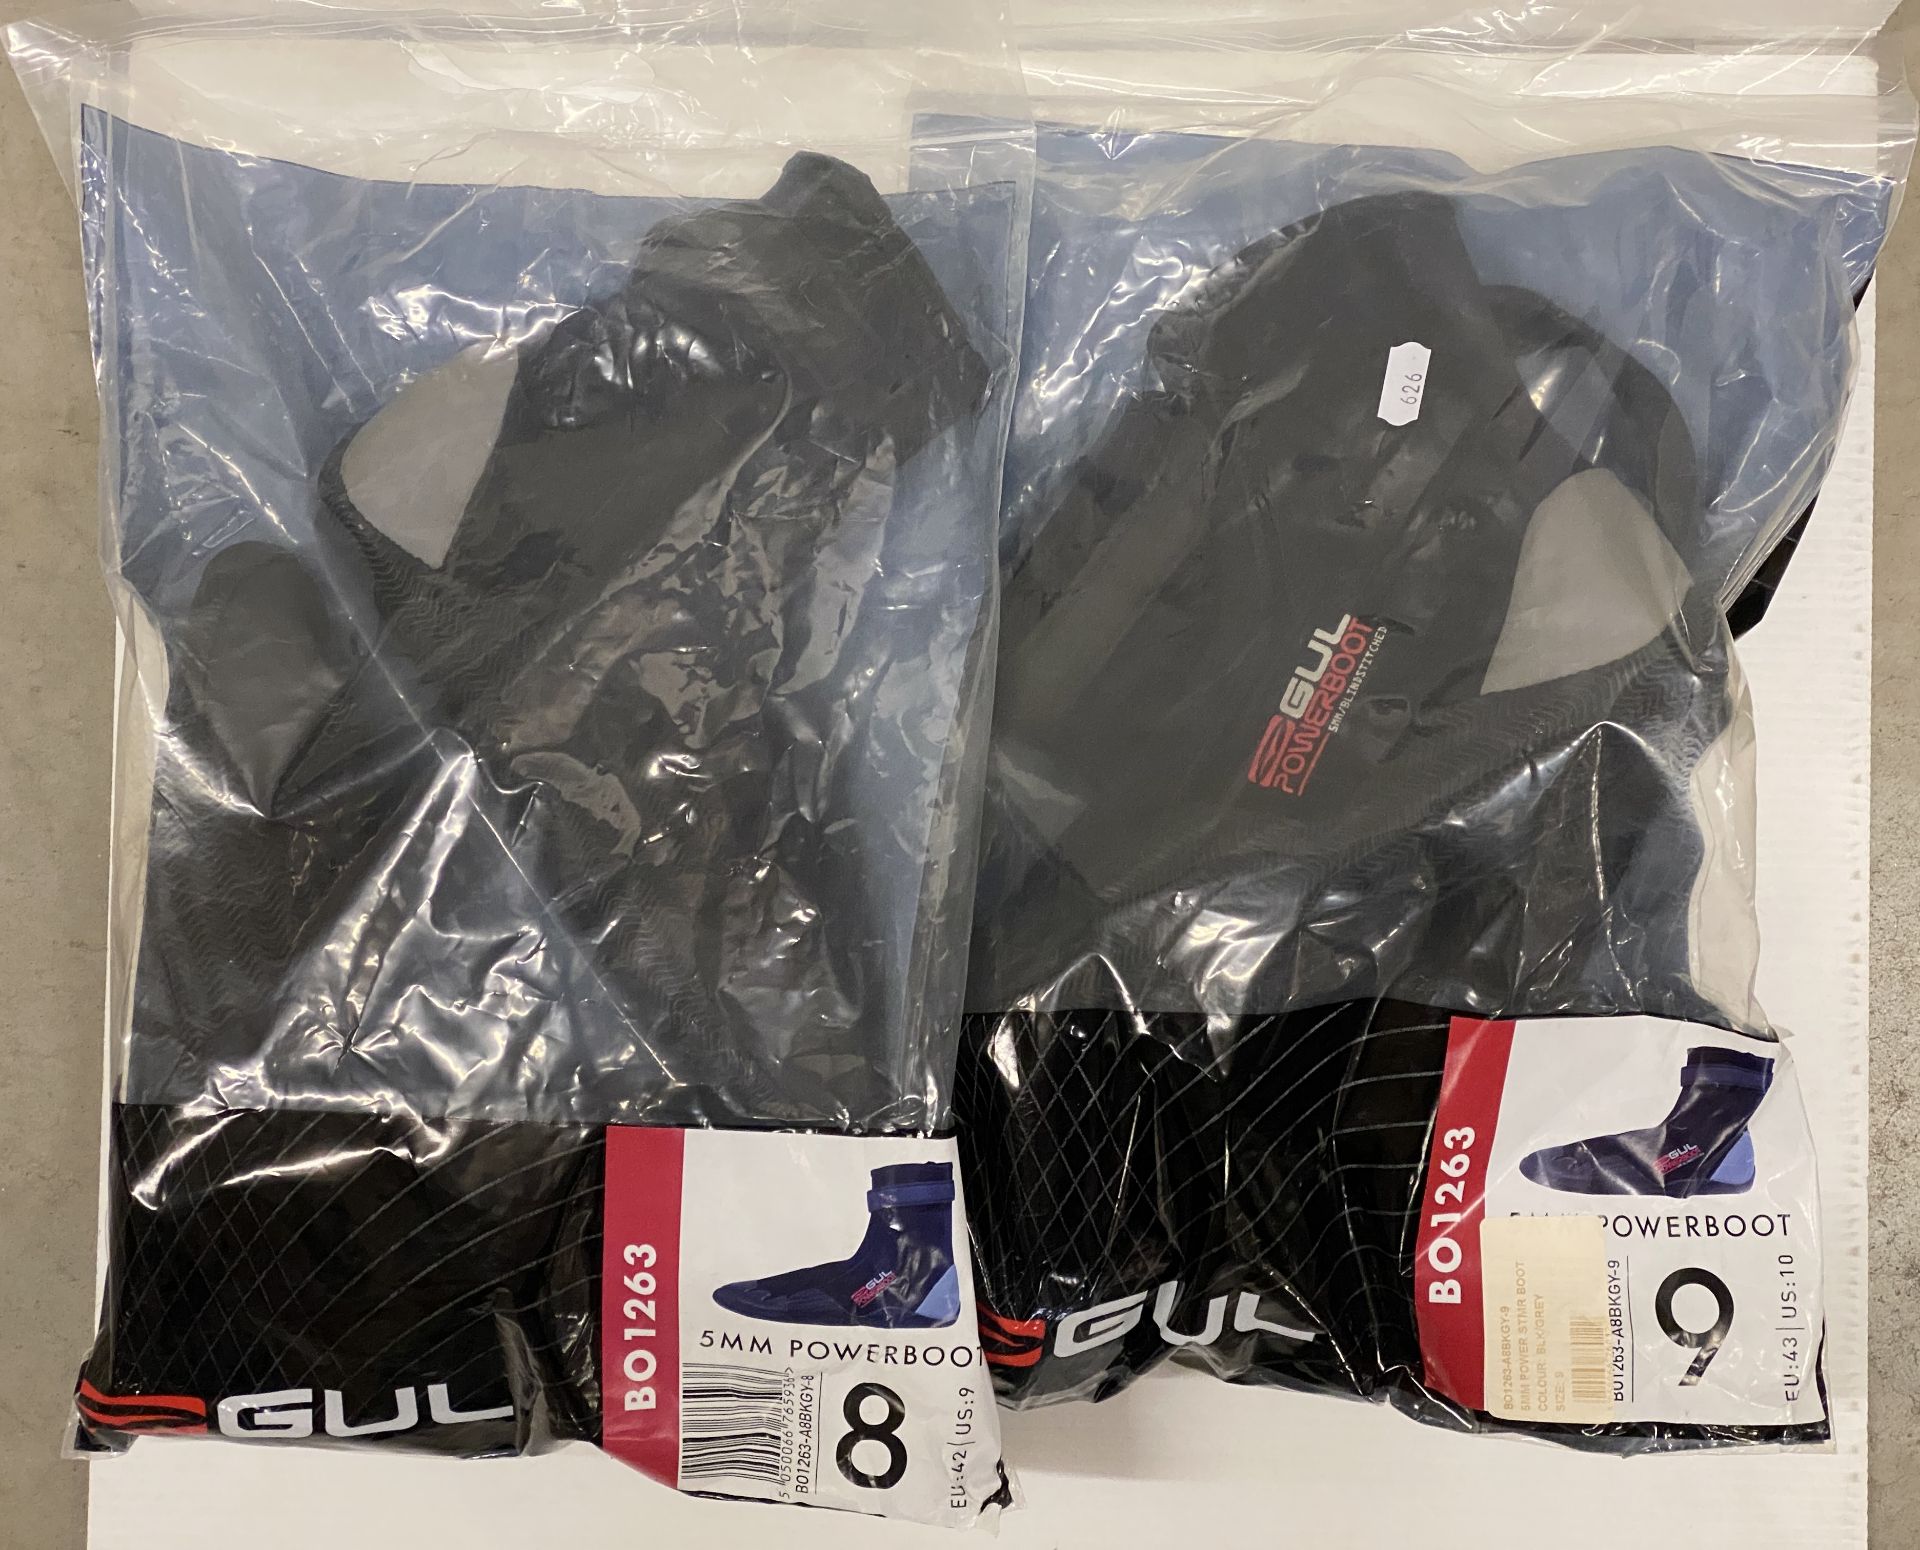 2 x Pairs of GUL 5mm Power Boots - Size UK 8 & 9 - (Saleroom Location L03)